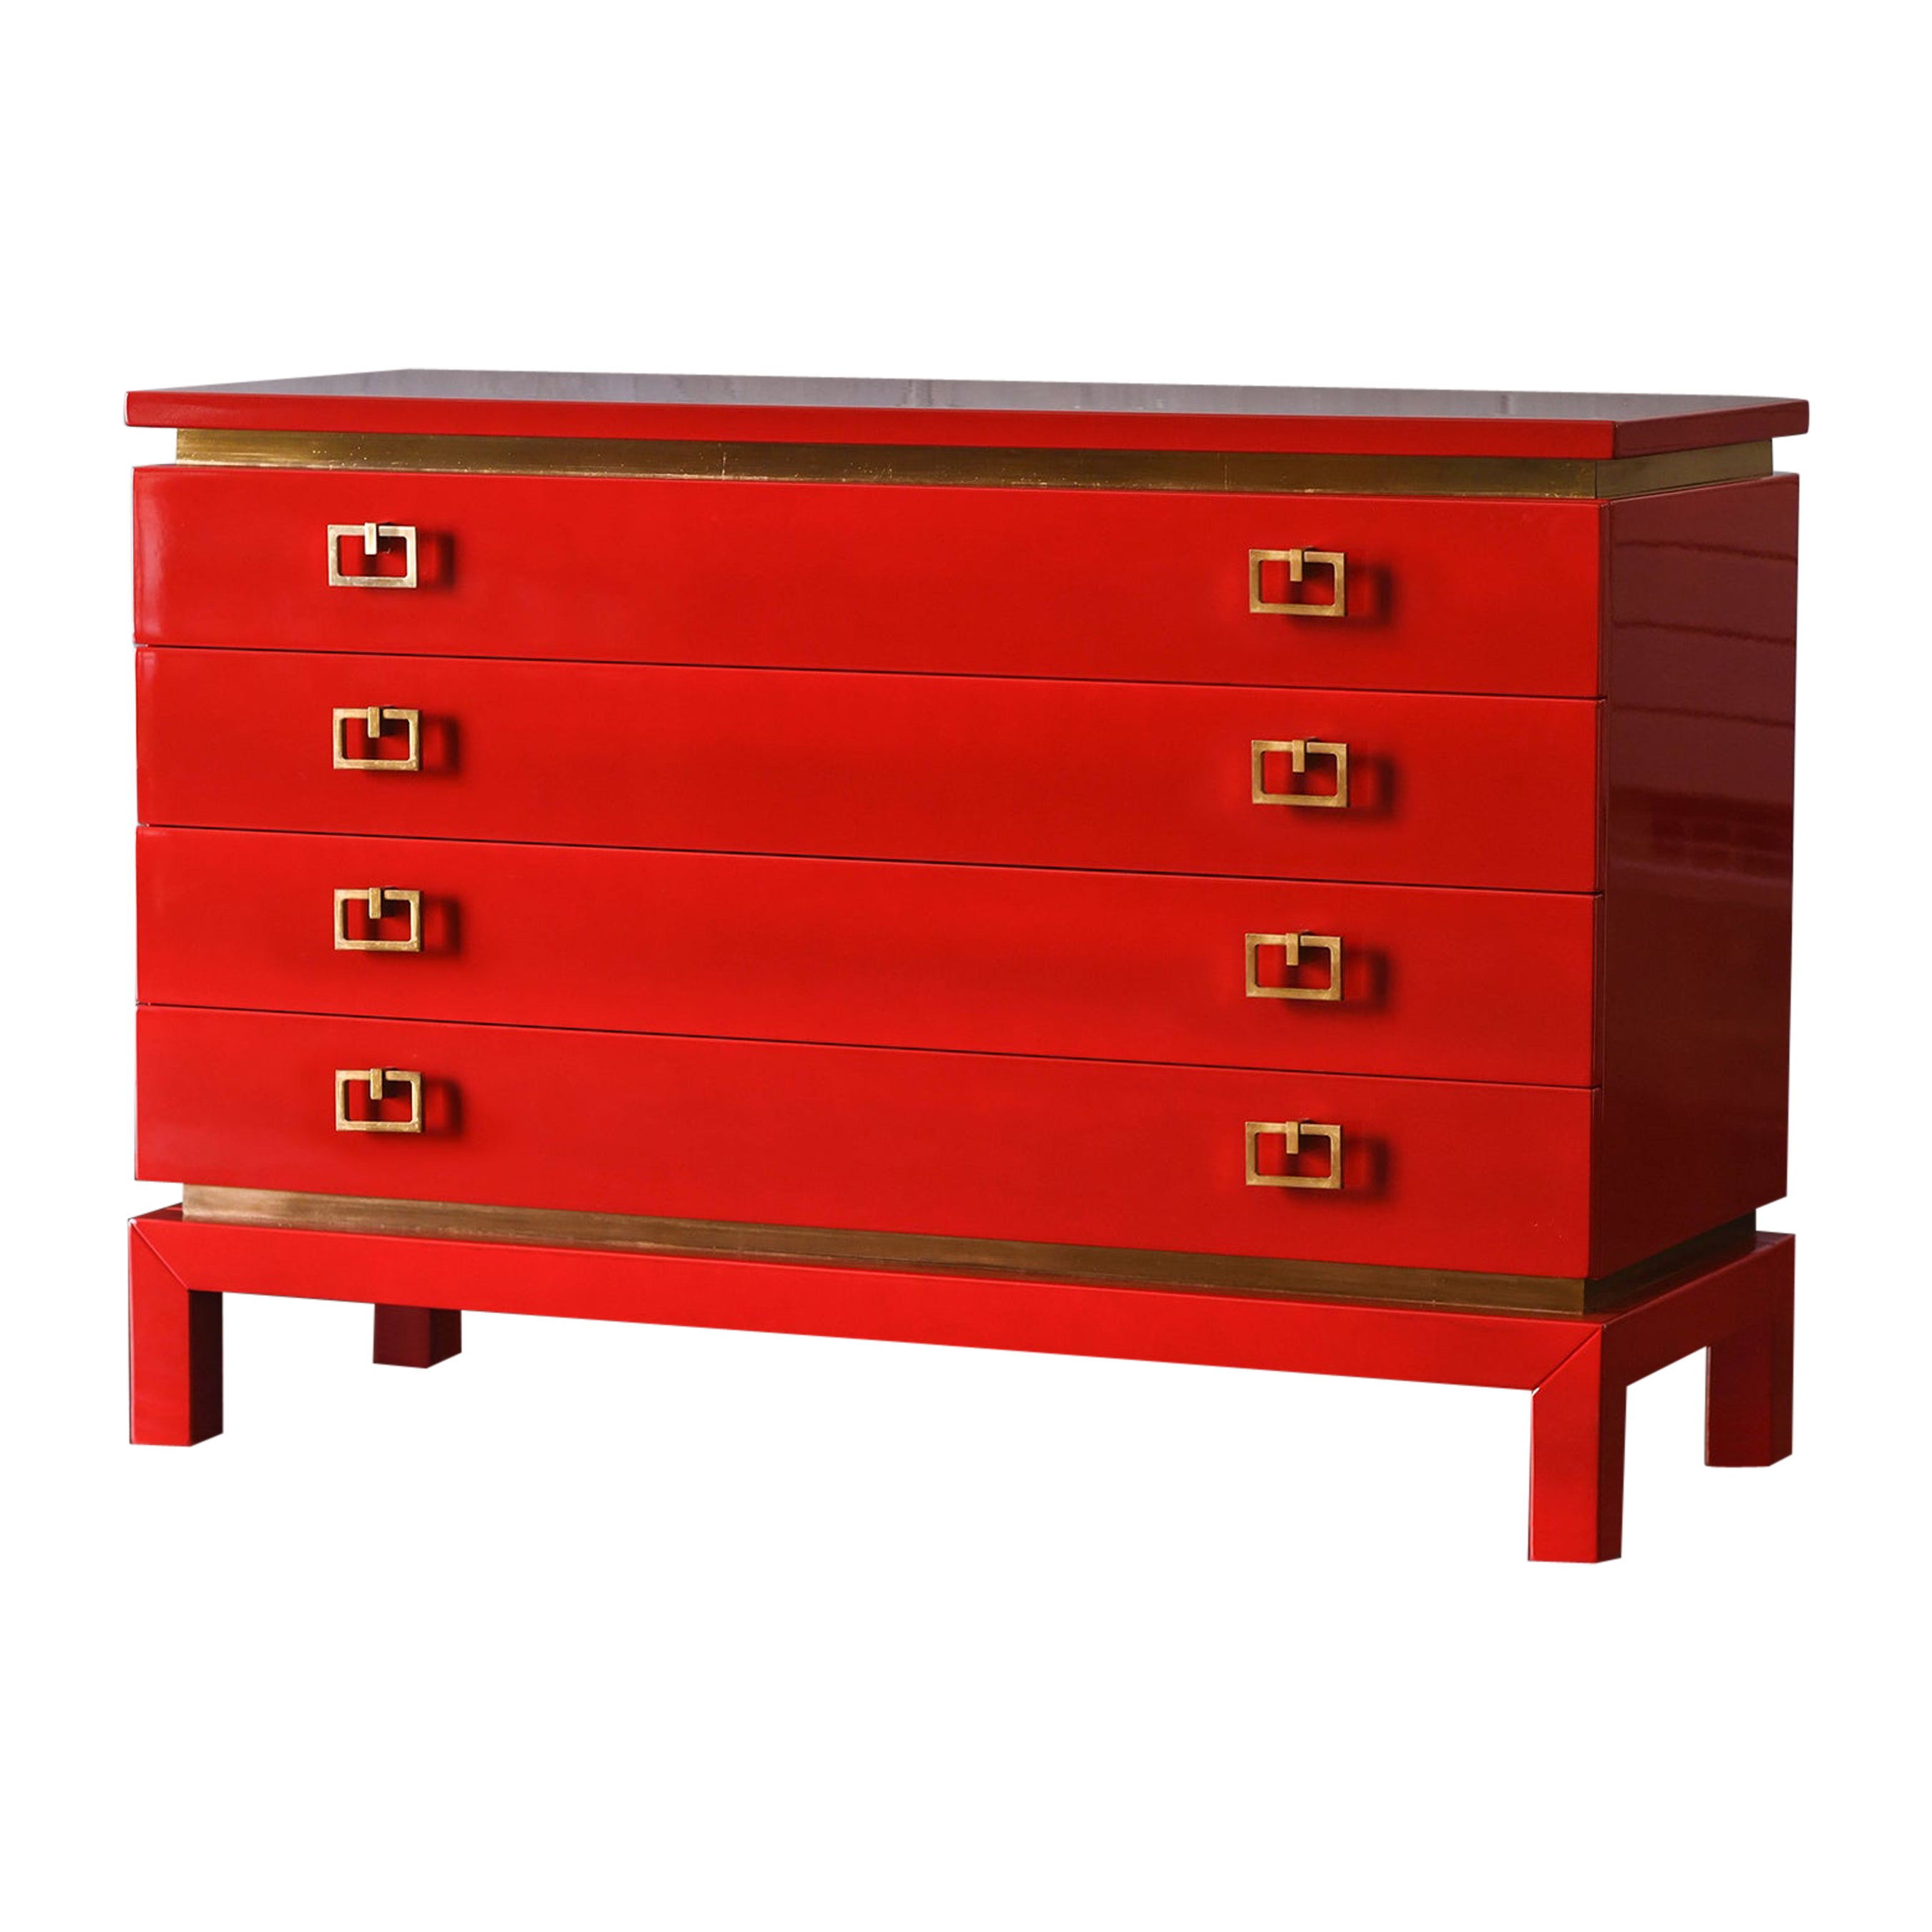 China Red Chest Of Drawers With Brass Details From The 1970s – Lacquered Series For Sale